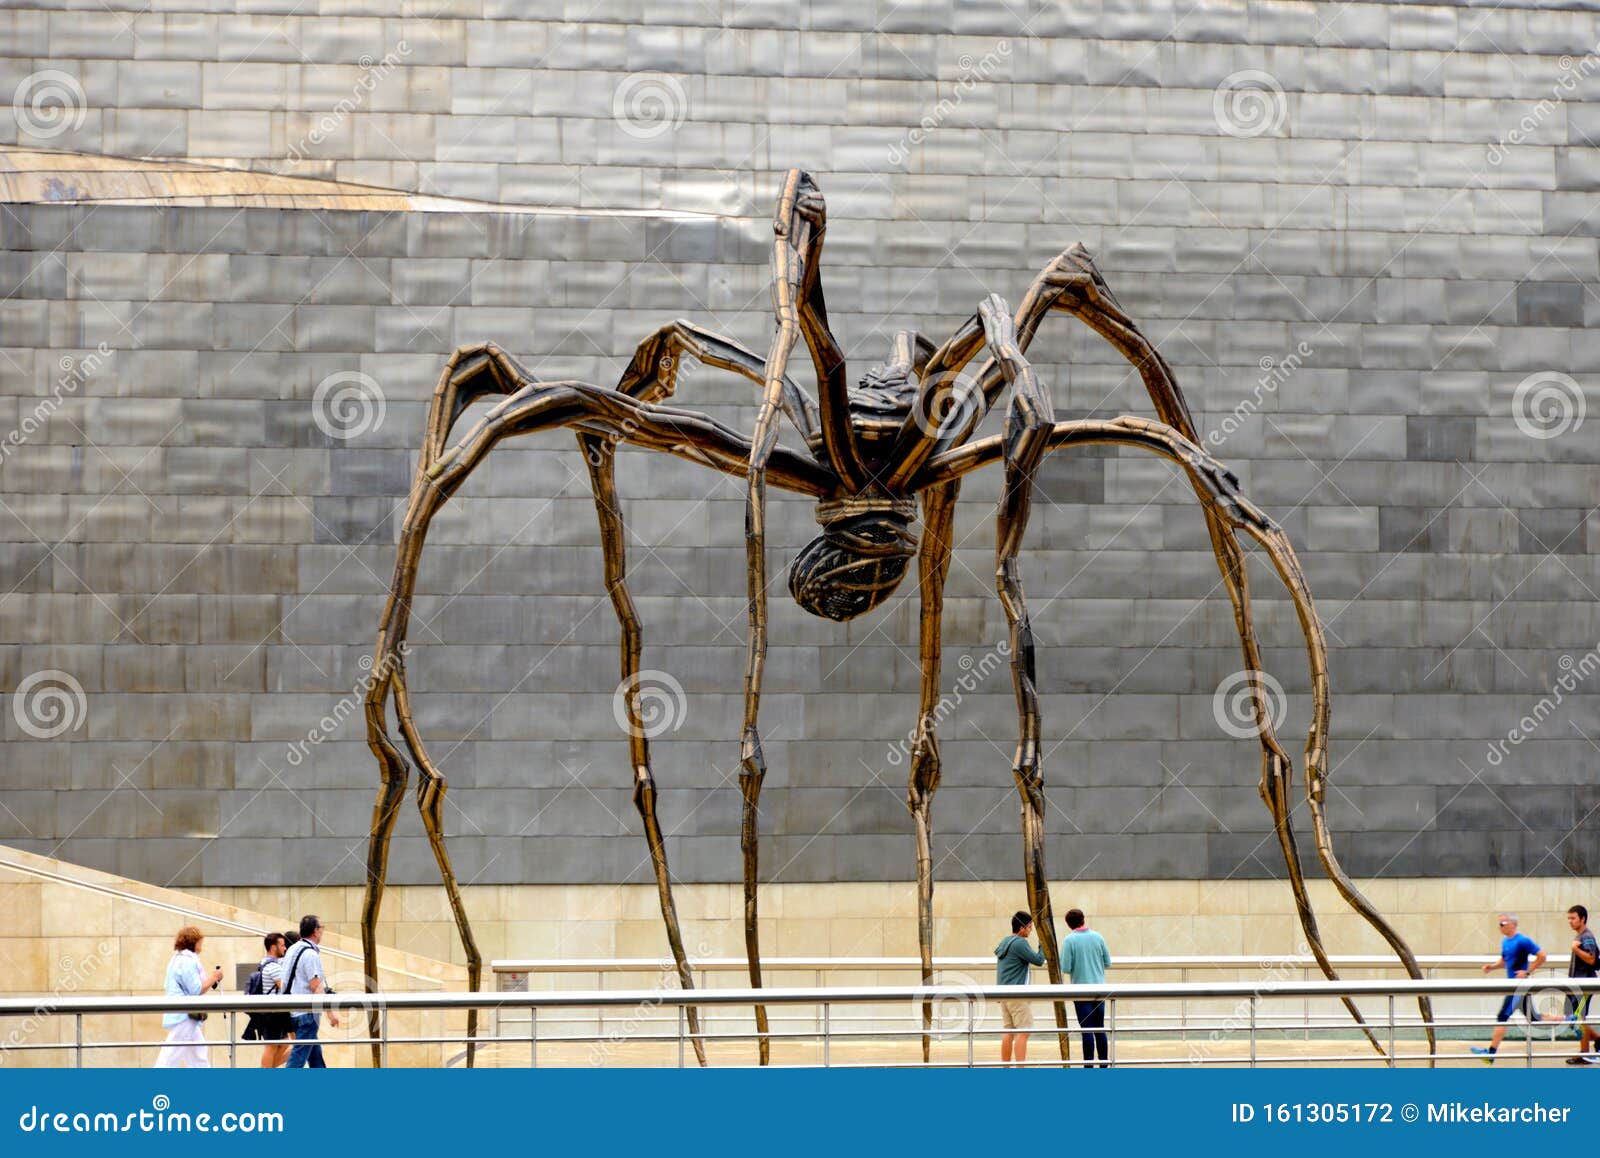 Spider sculpture in Bilbao editorial photography. Image of